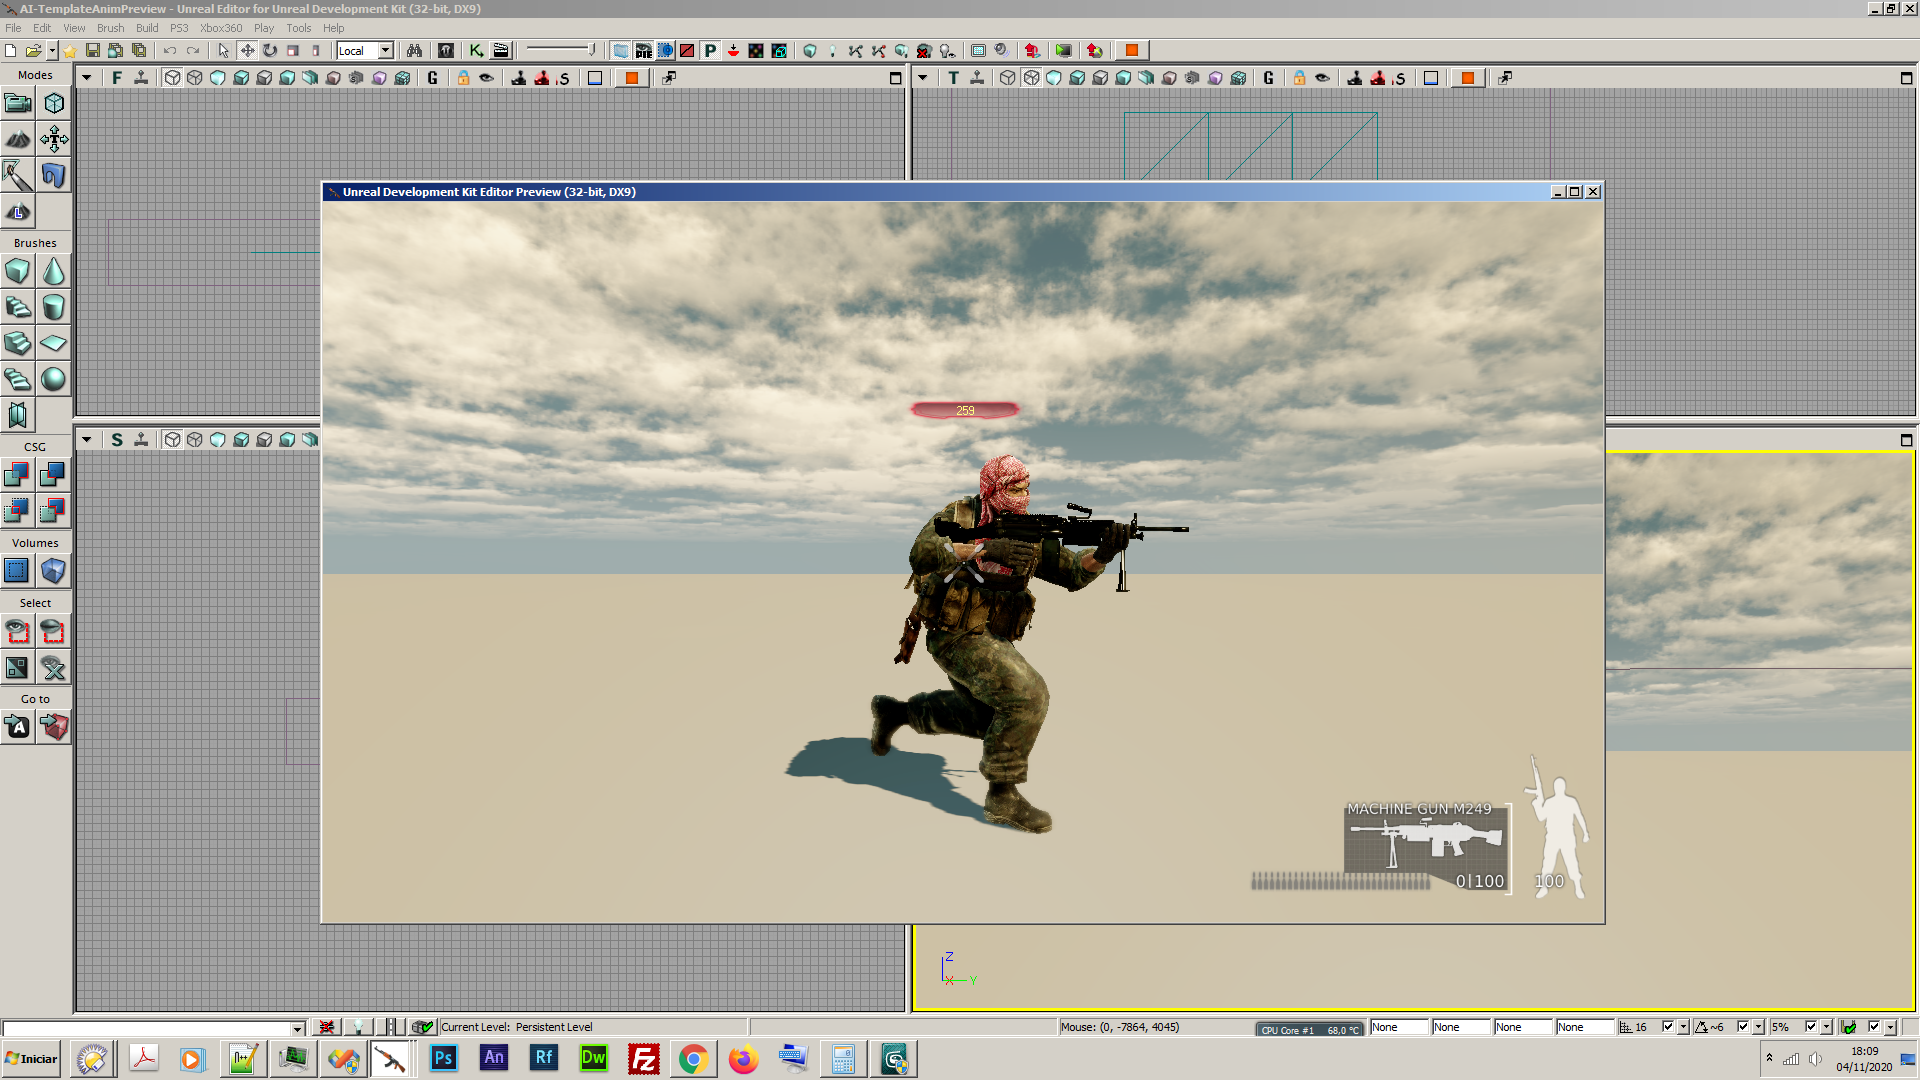 M249 4 1 - I am developing a game about Palestine Resistance